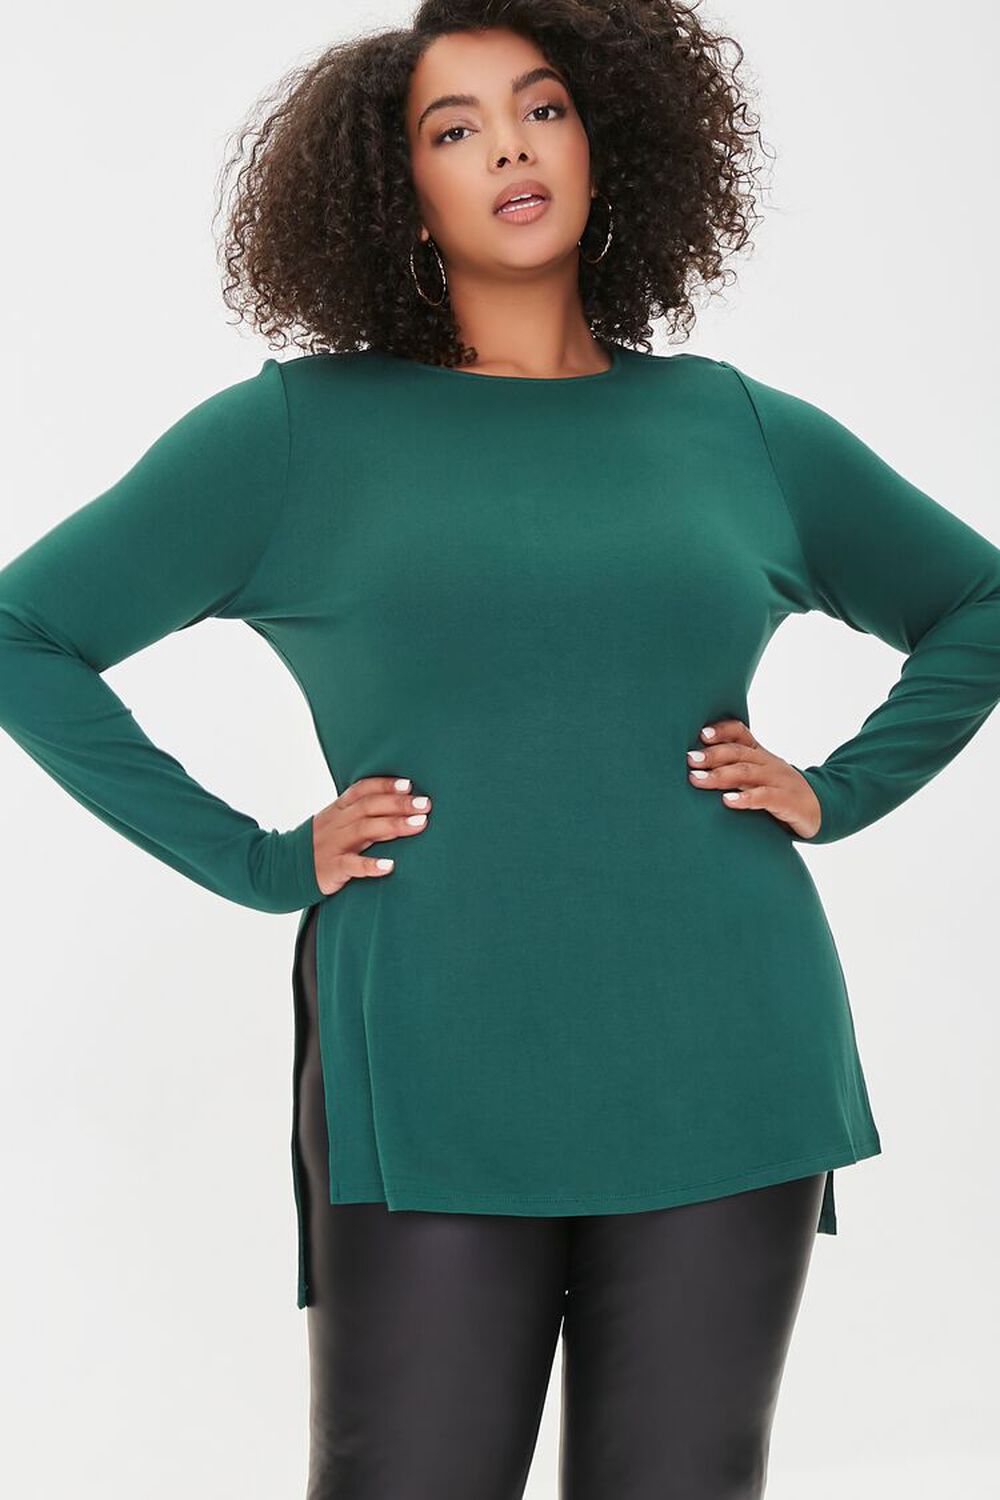 HUNTER GREEN Plus Size High-Low Top, image 1